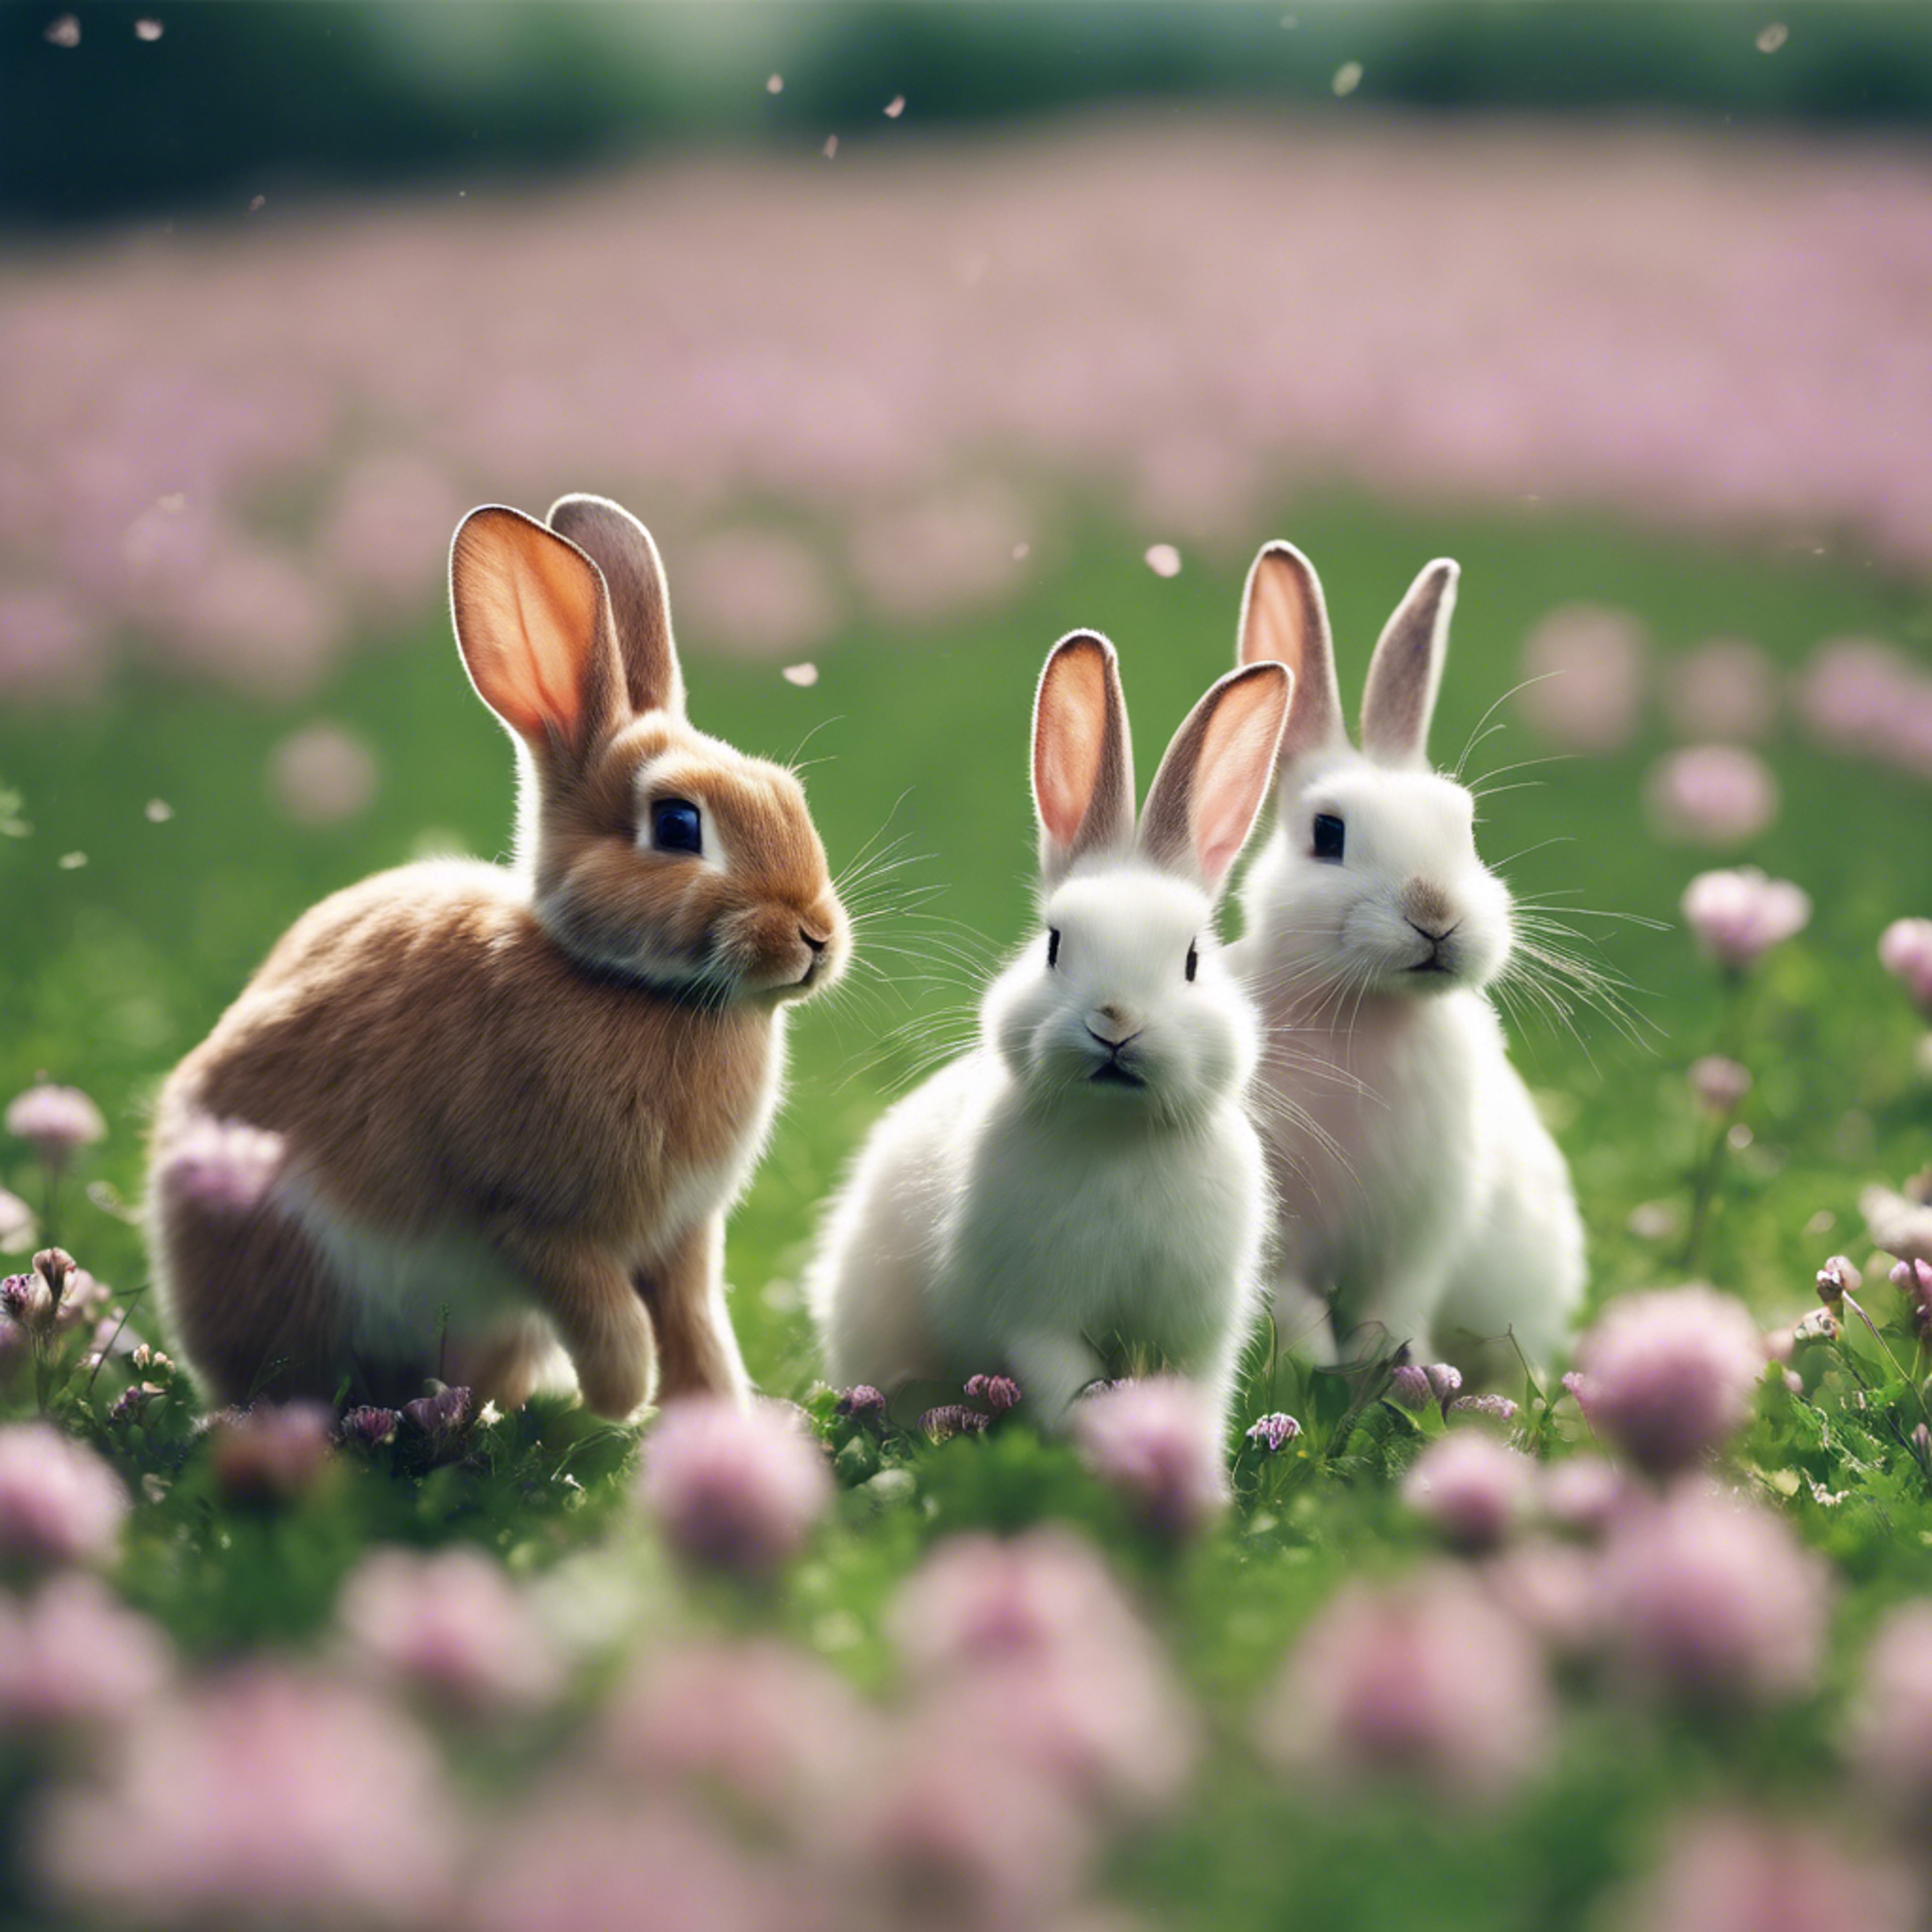 A group of rabbits playing tag in a clover field. Wallpaper[610eb32603614430a4af]